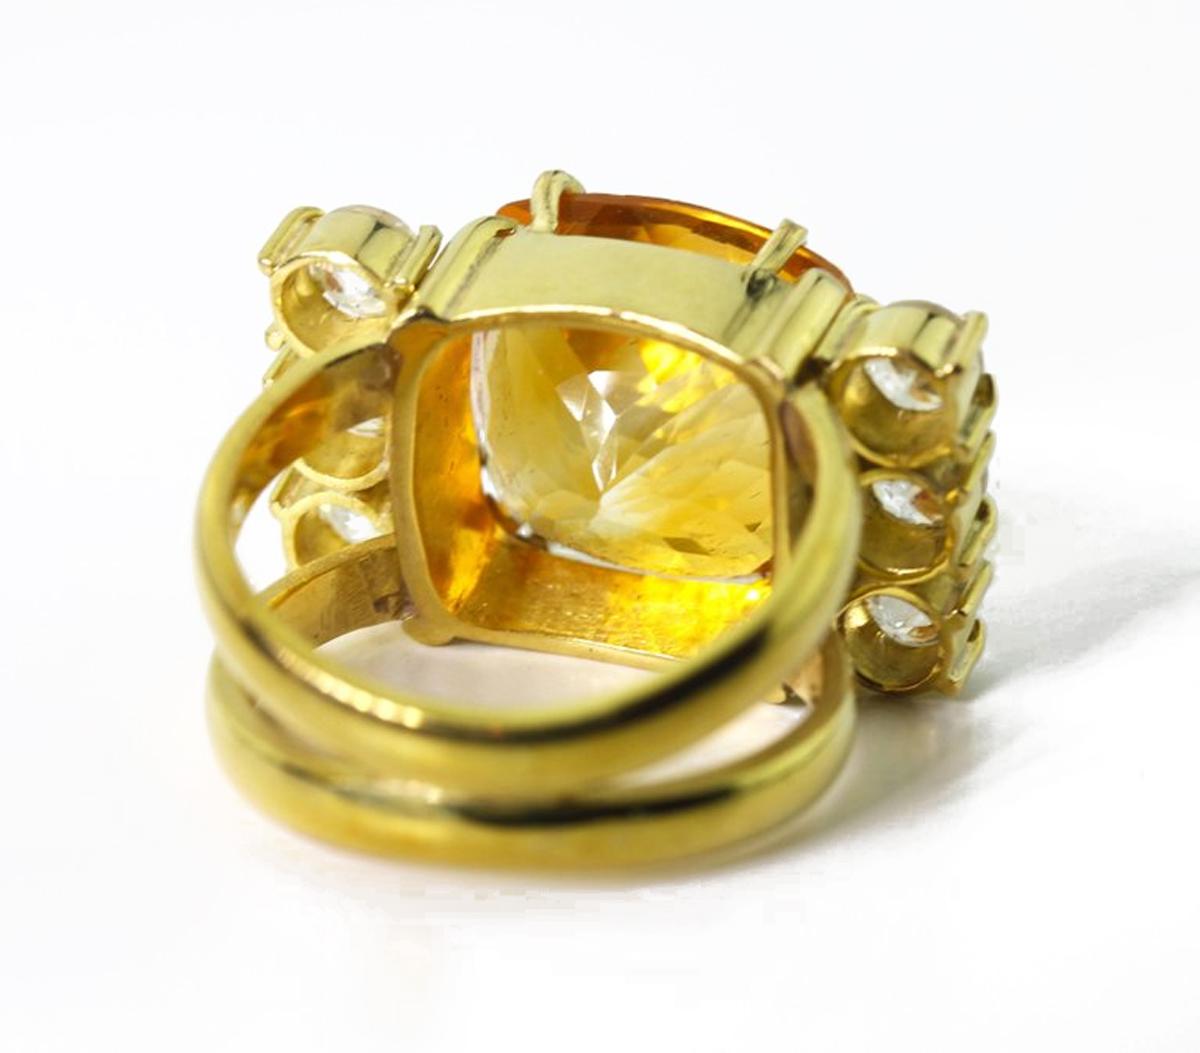 AJD Very Hollywood 11.5 Carat Golden Citrine & Sapphire 18Kt Gold Cocktail Ring In New Condition For Sale In Raleigh, NC